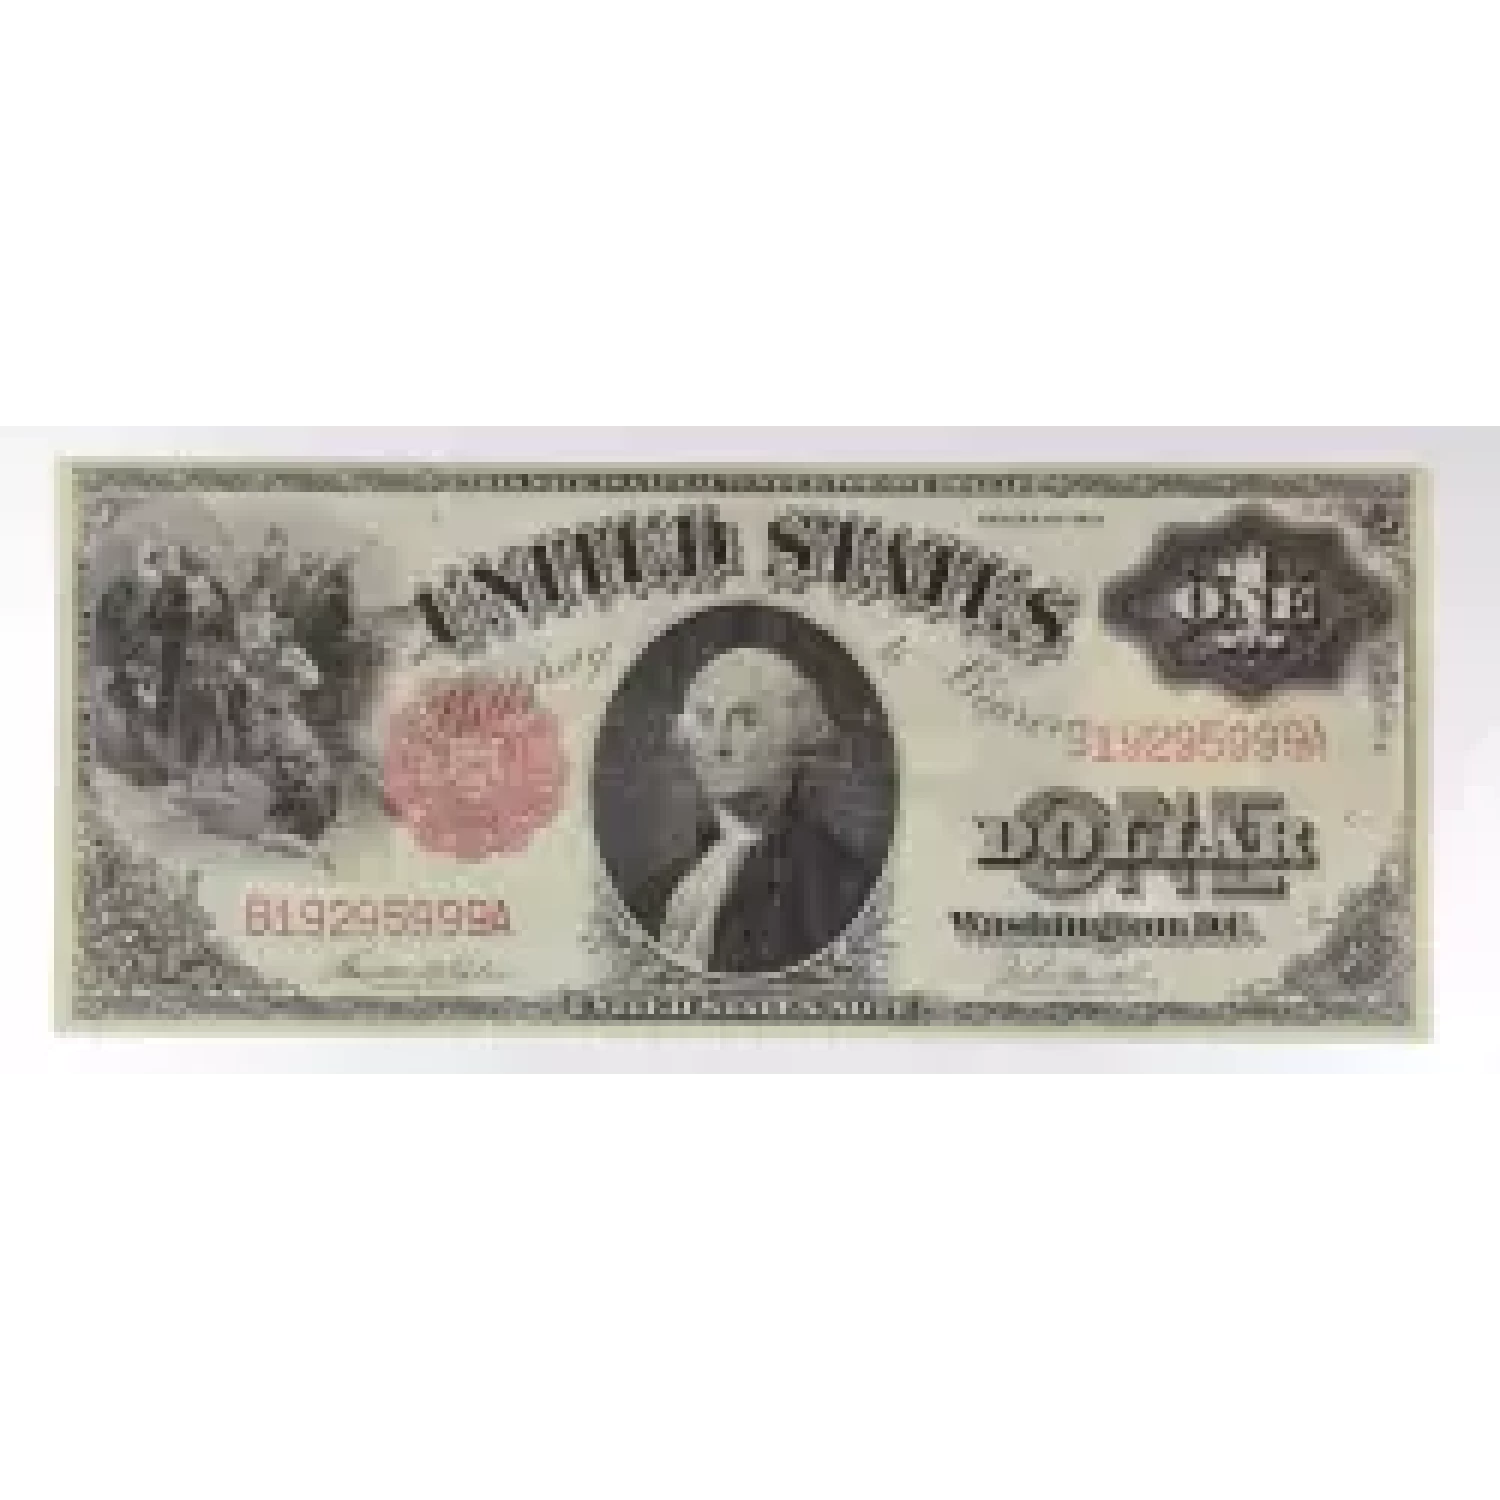 $1 1917 Small Red, scalloped Legal Tender Issues 36